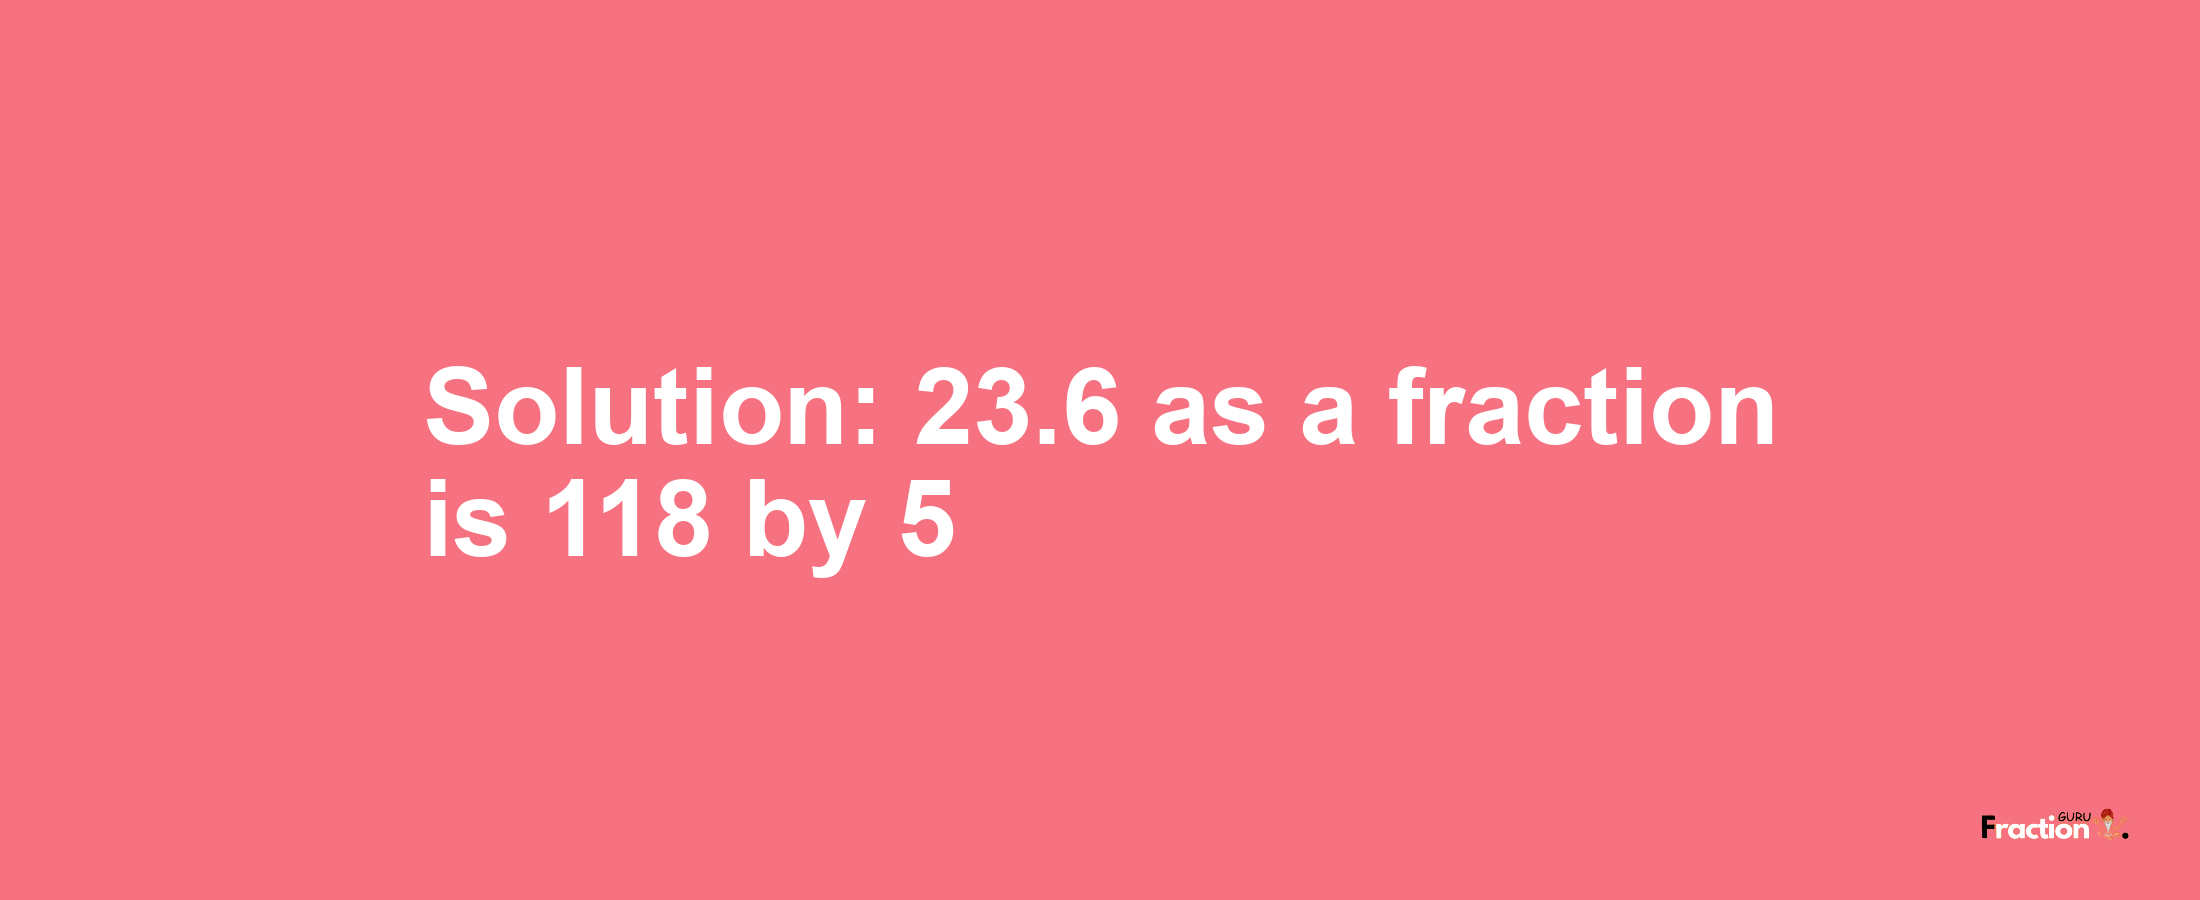 Solution:23.6 as a fraction is 118/5